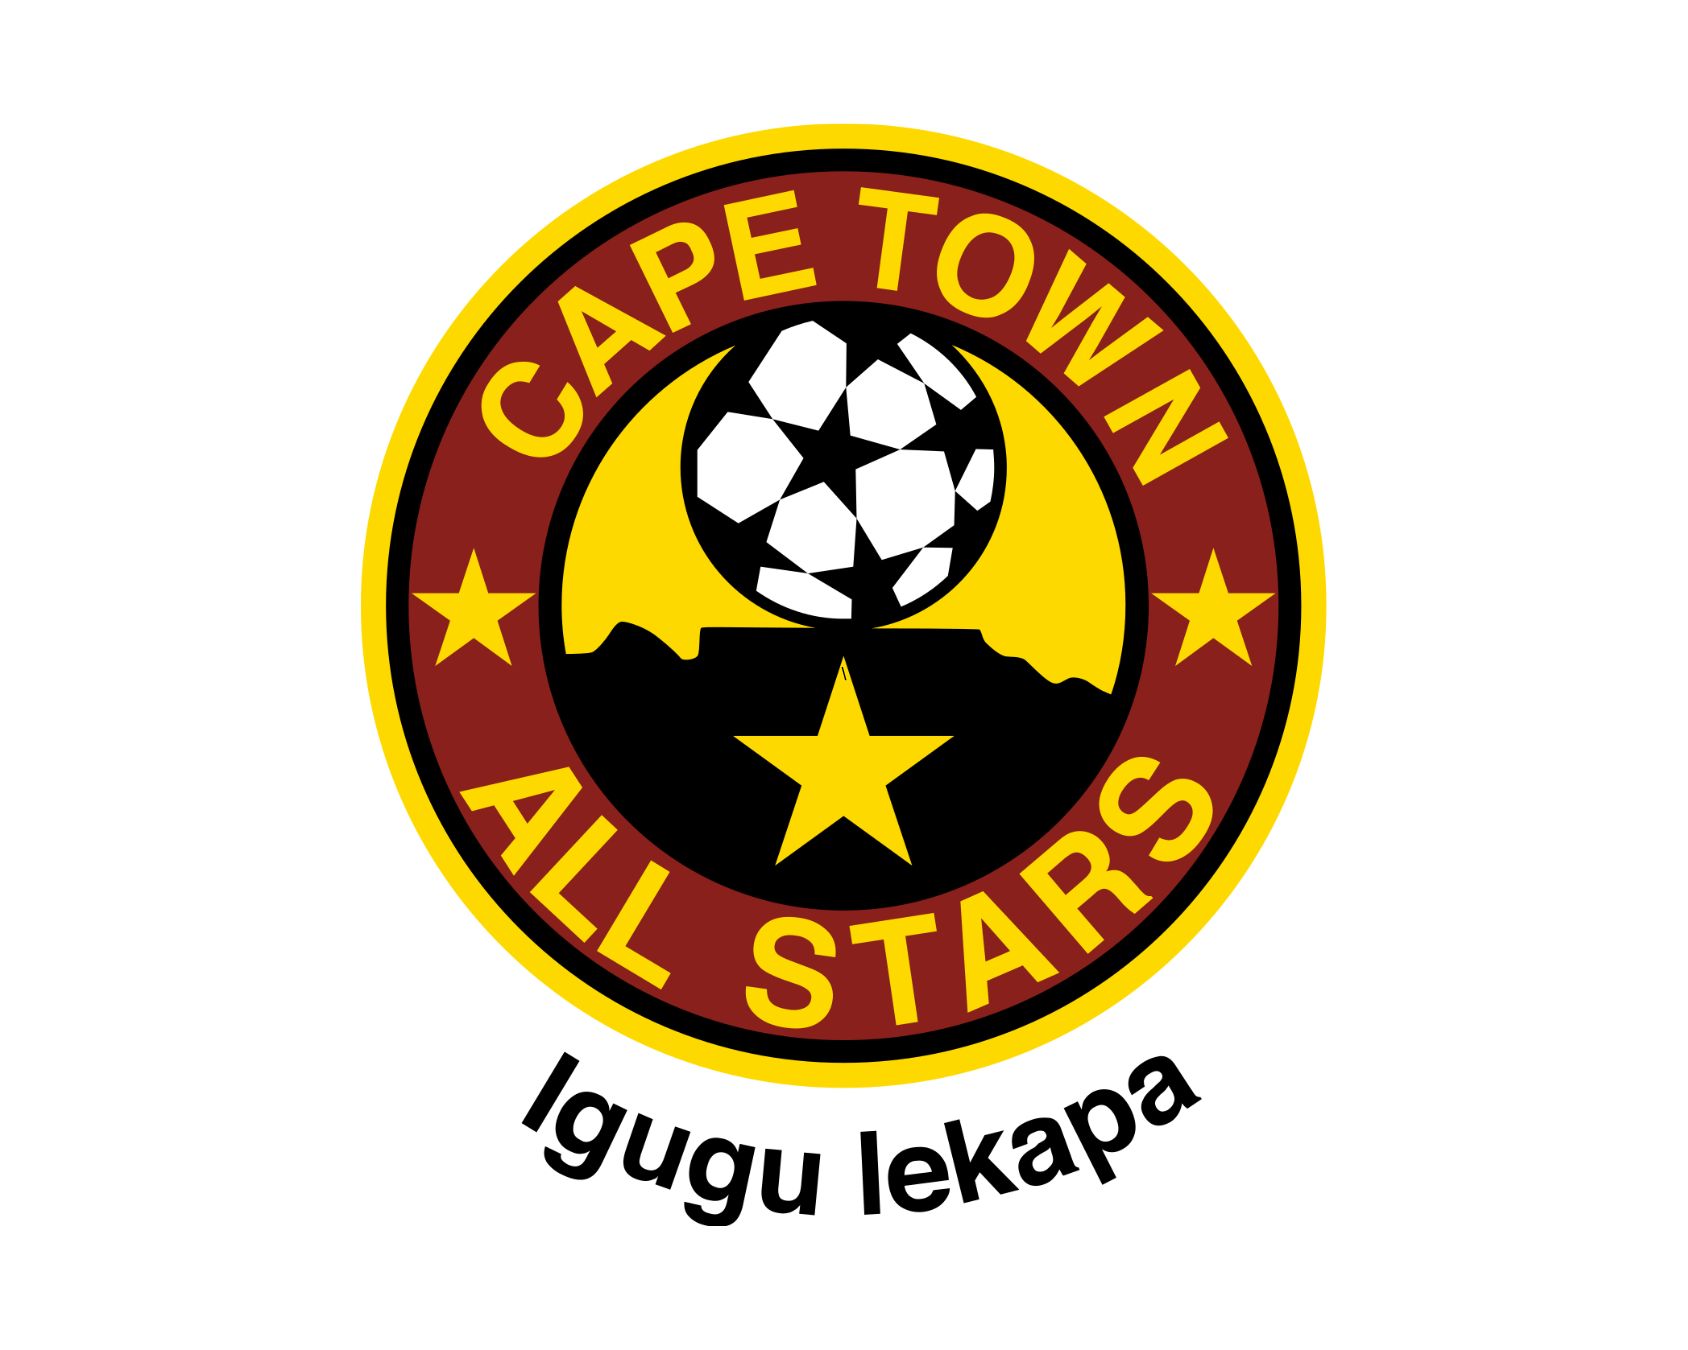 cape-town-all-stars-22-football-club-facts